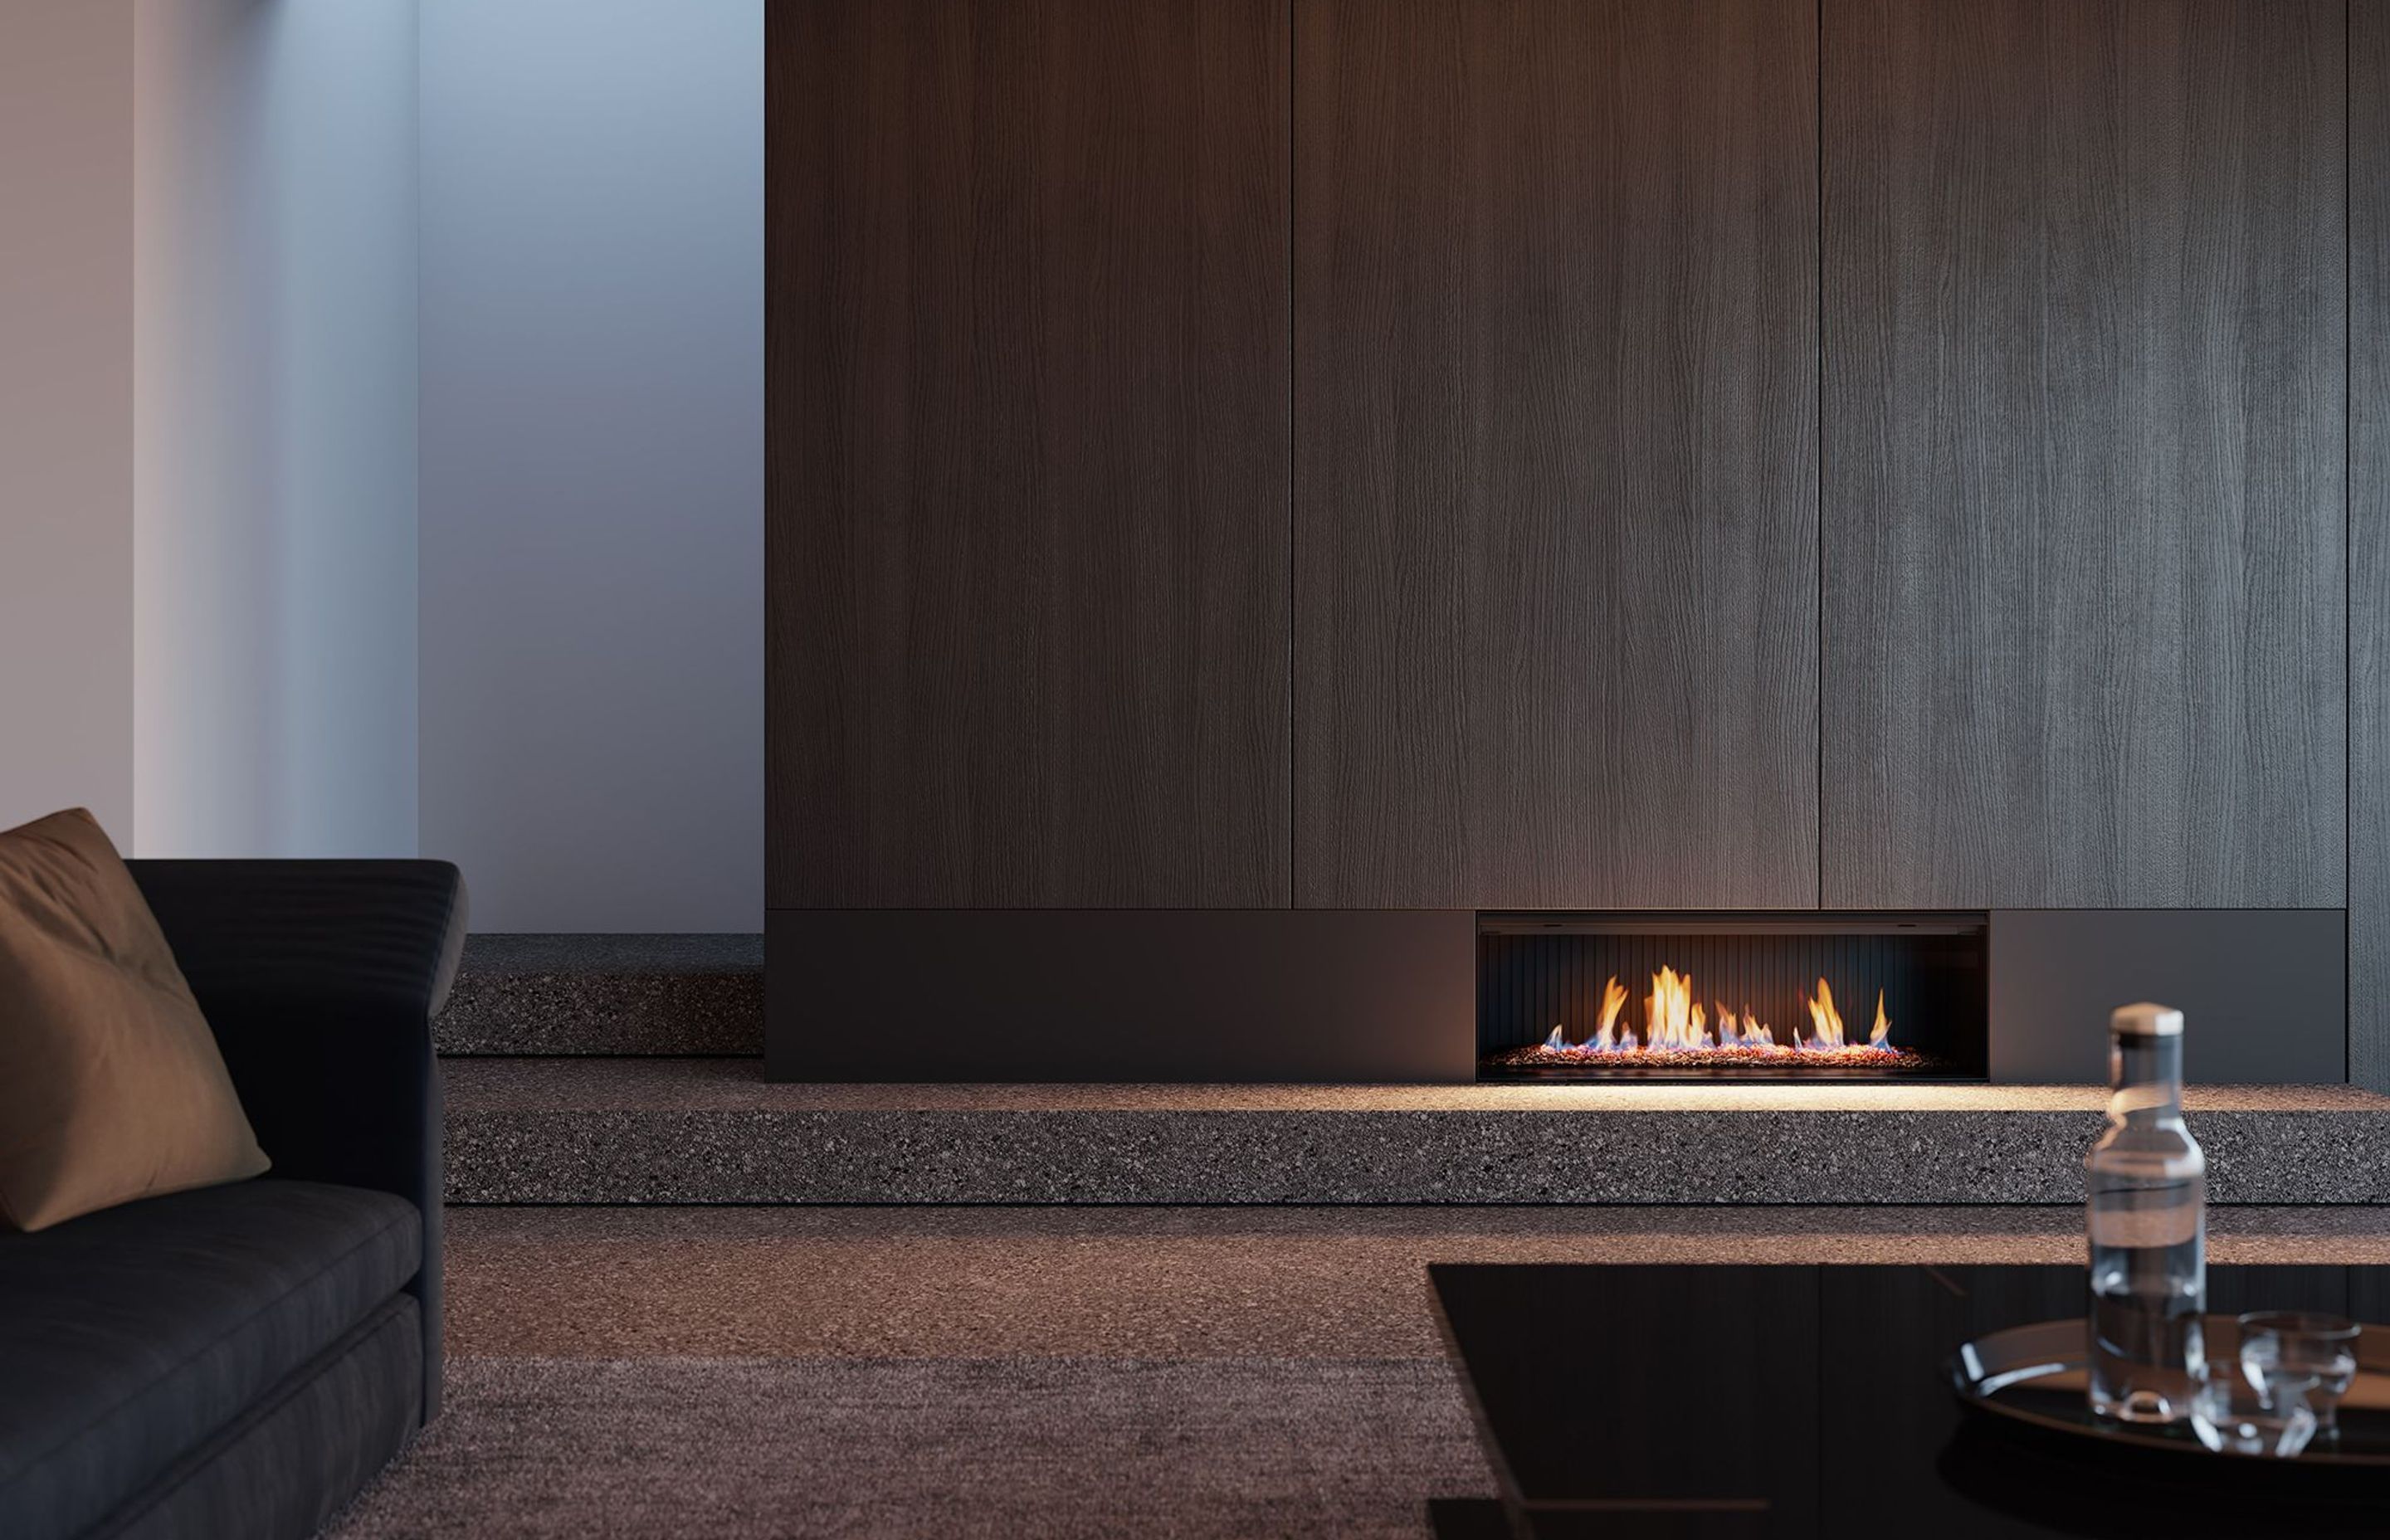 The new beautifully-proportioned Linear 1000 fireplace.